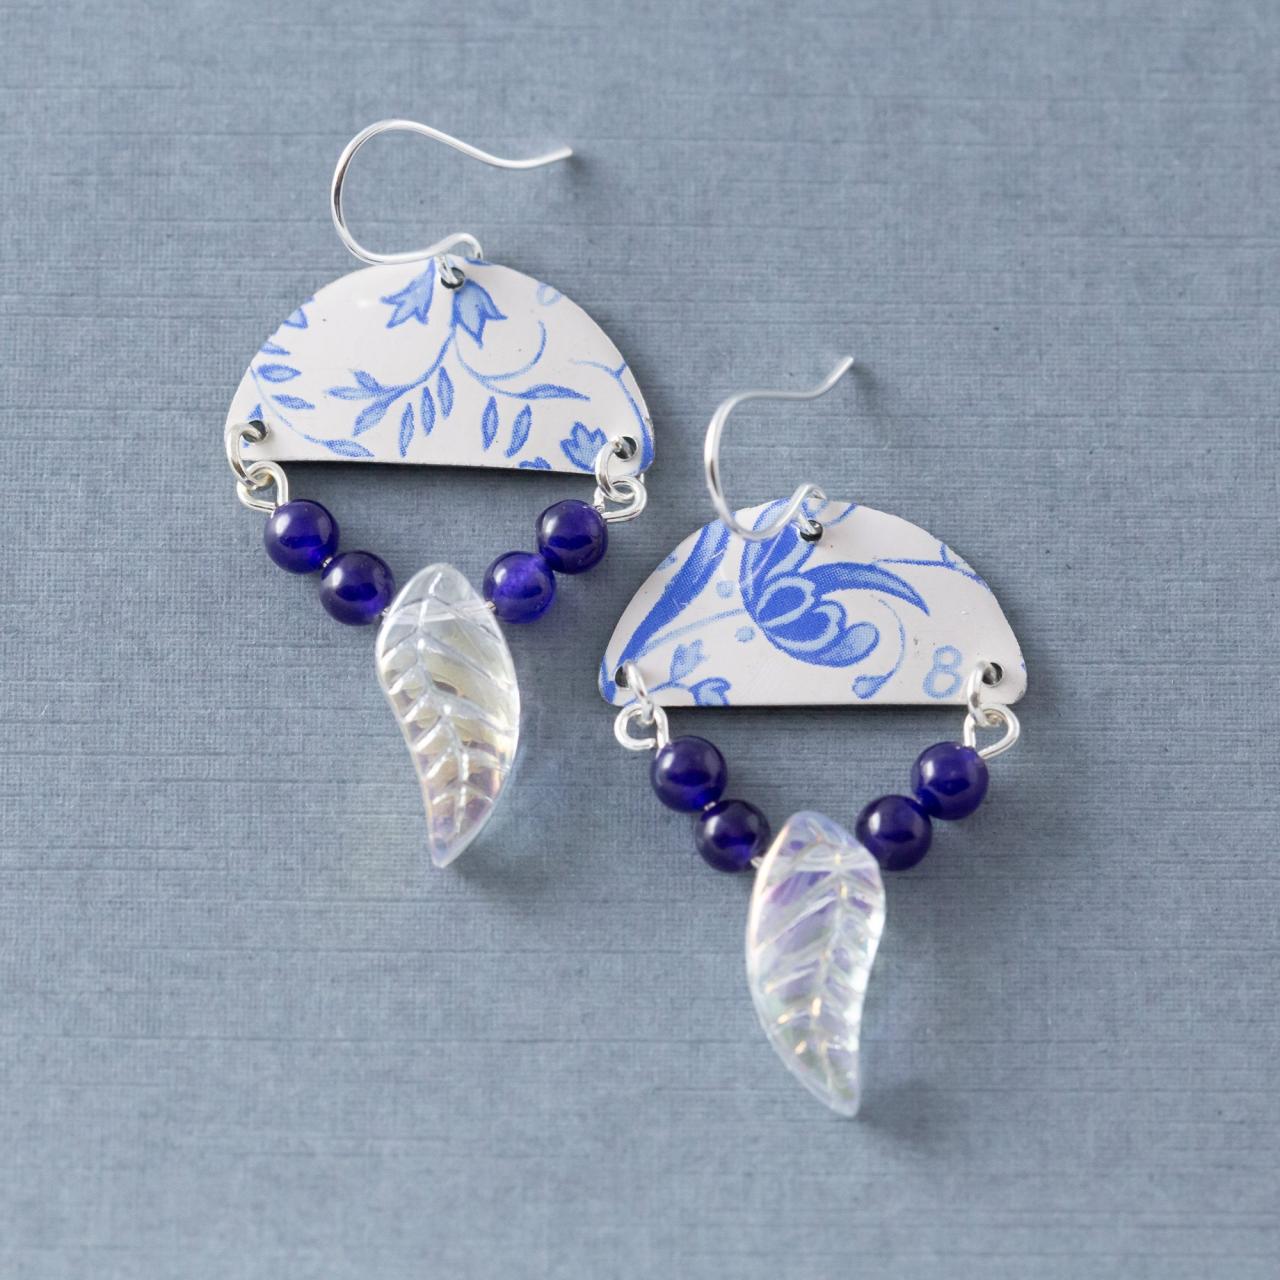 Blue And White Delft Floral Half Circle Tin Earrings With Cobalt Blue Beads And Glass Leaf, Half Circle Jewelry